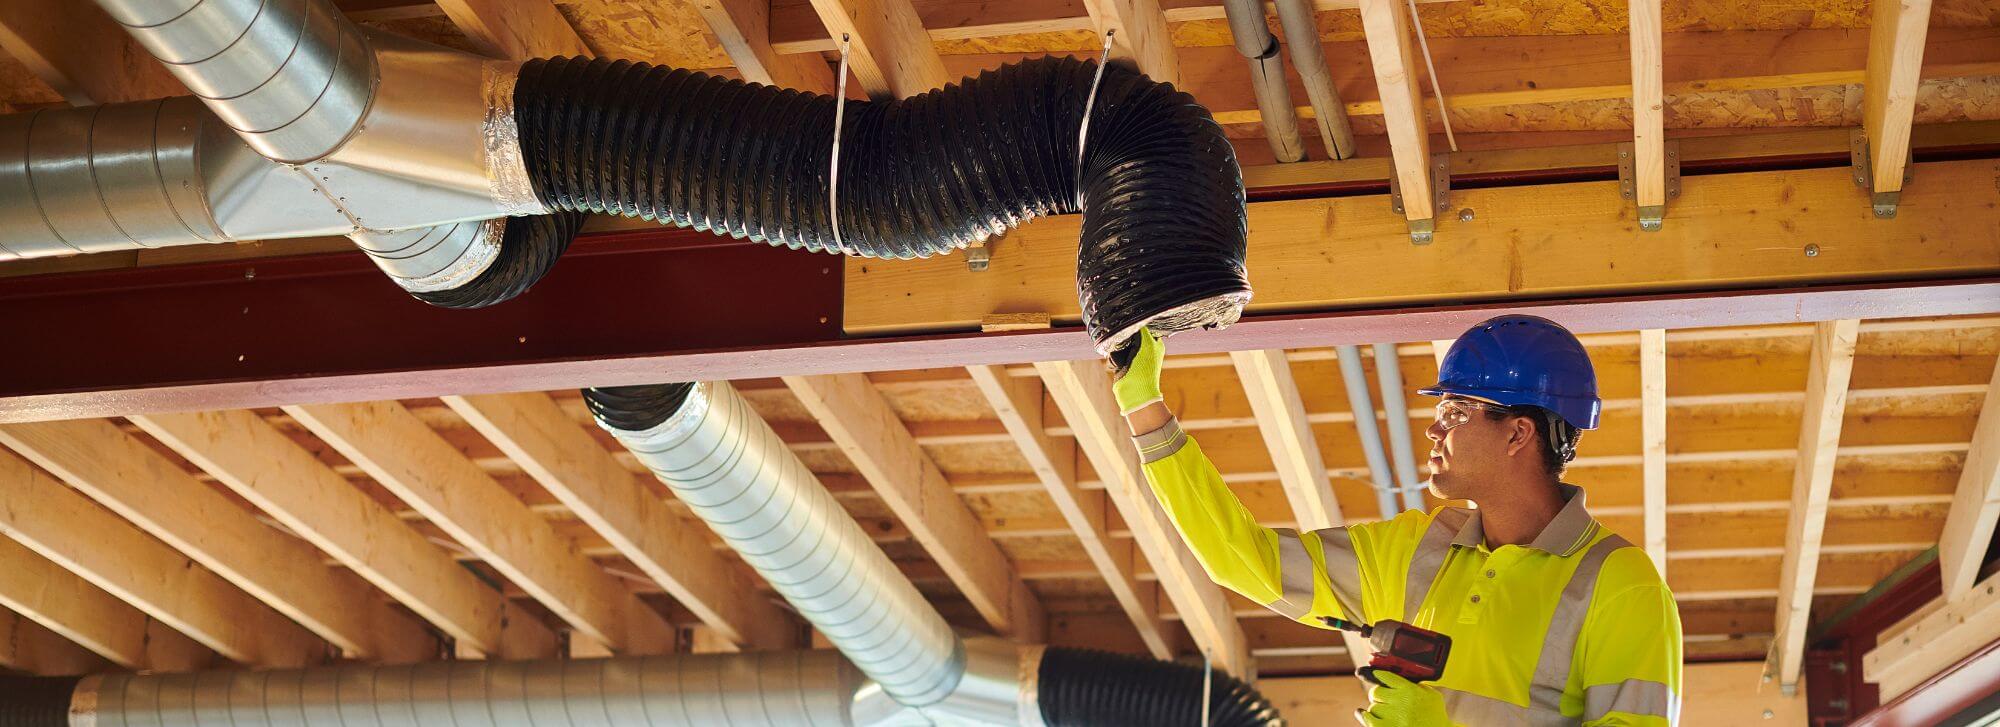 Ducting & Ductwork 